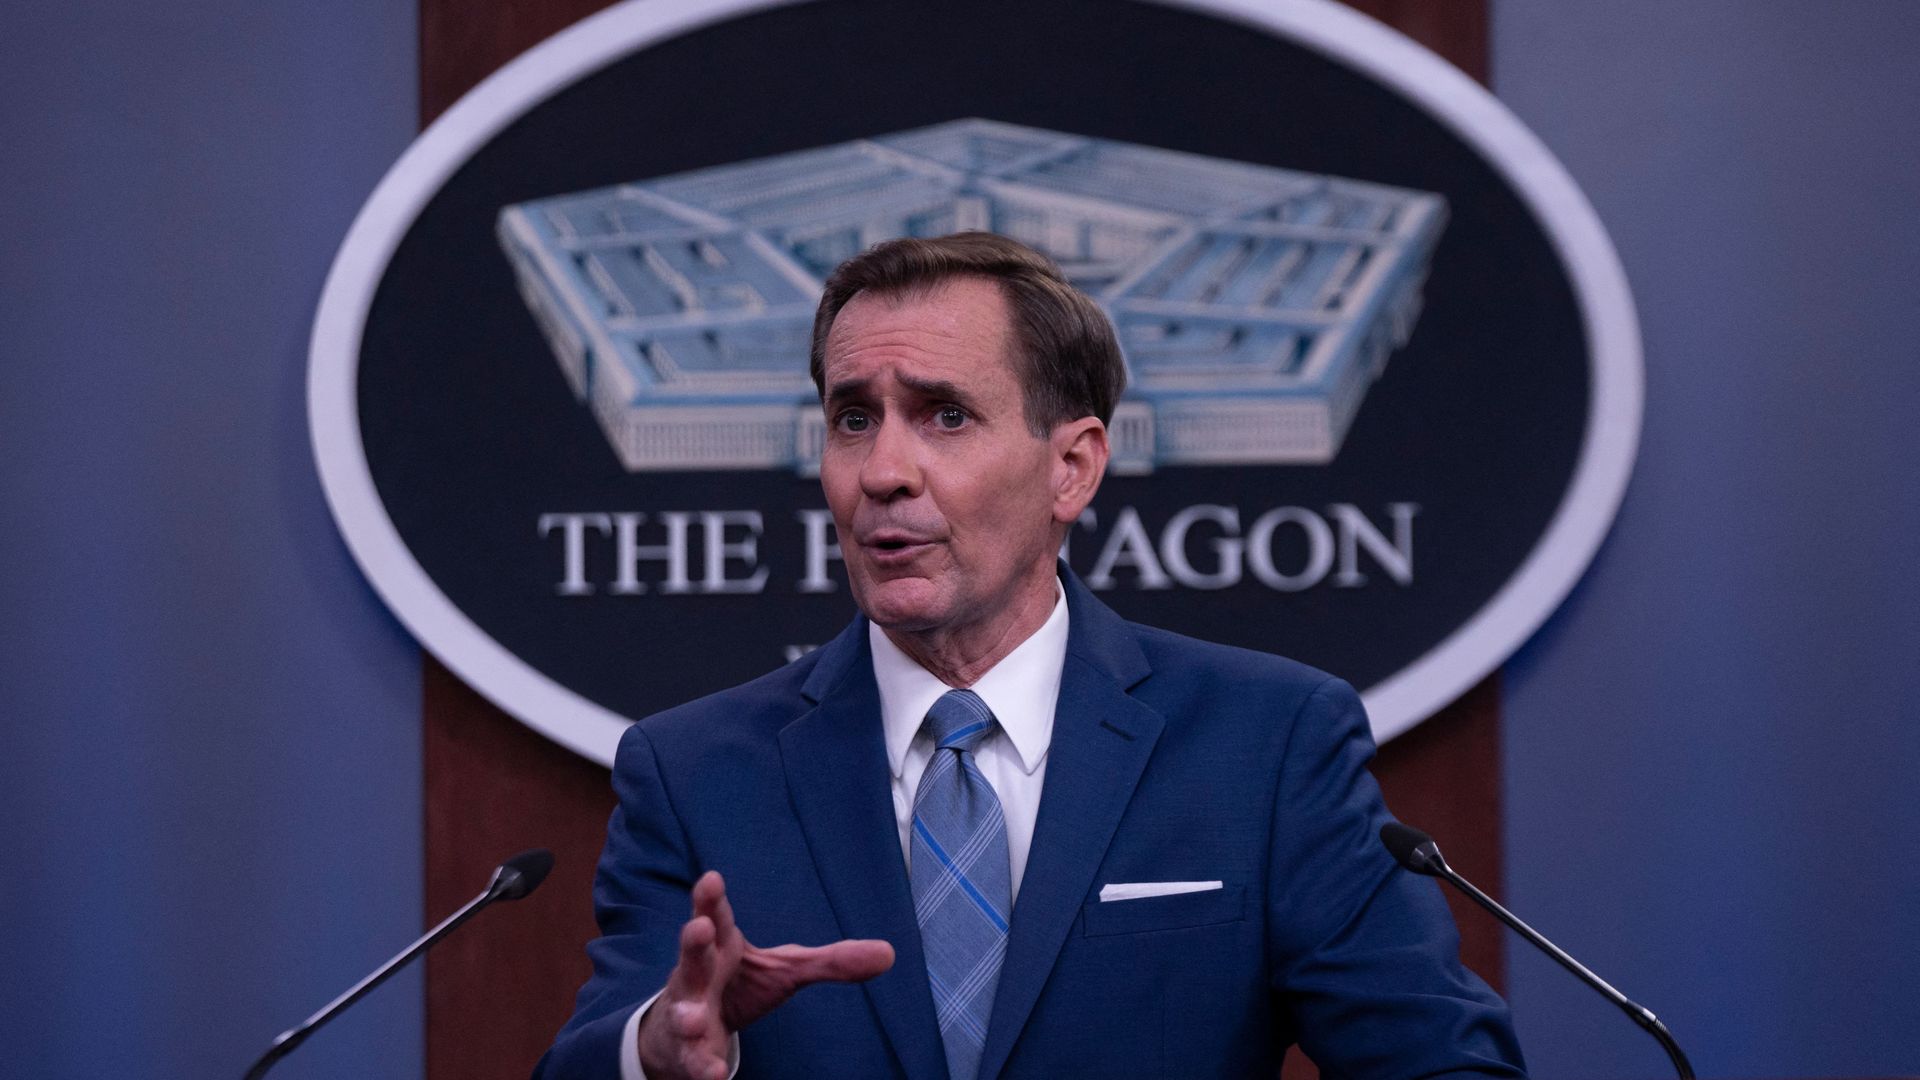 Pentagon Spokesman John Kirby speaks during a press briefing on the situation in Afghanistan at the Pentagon in Washington, DC on August 16